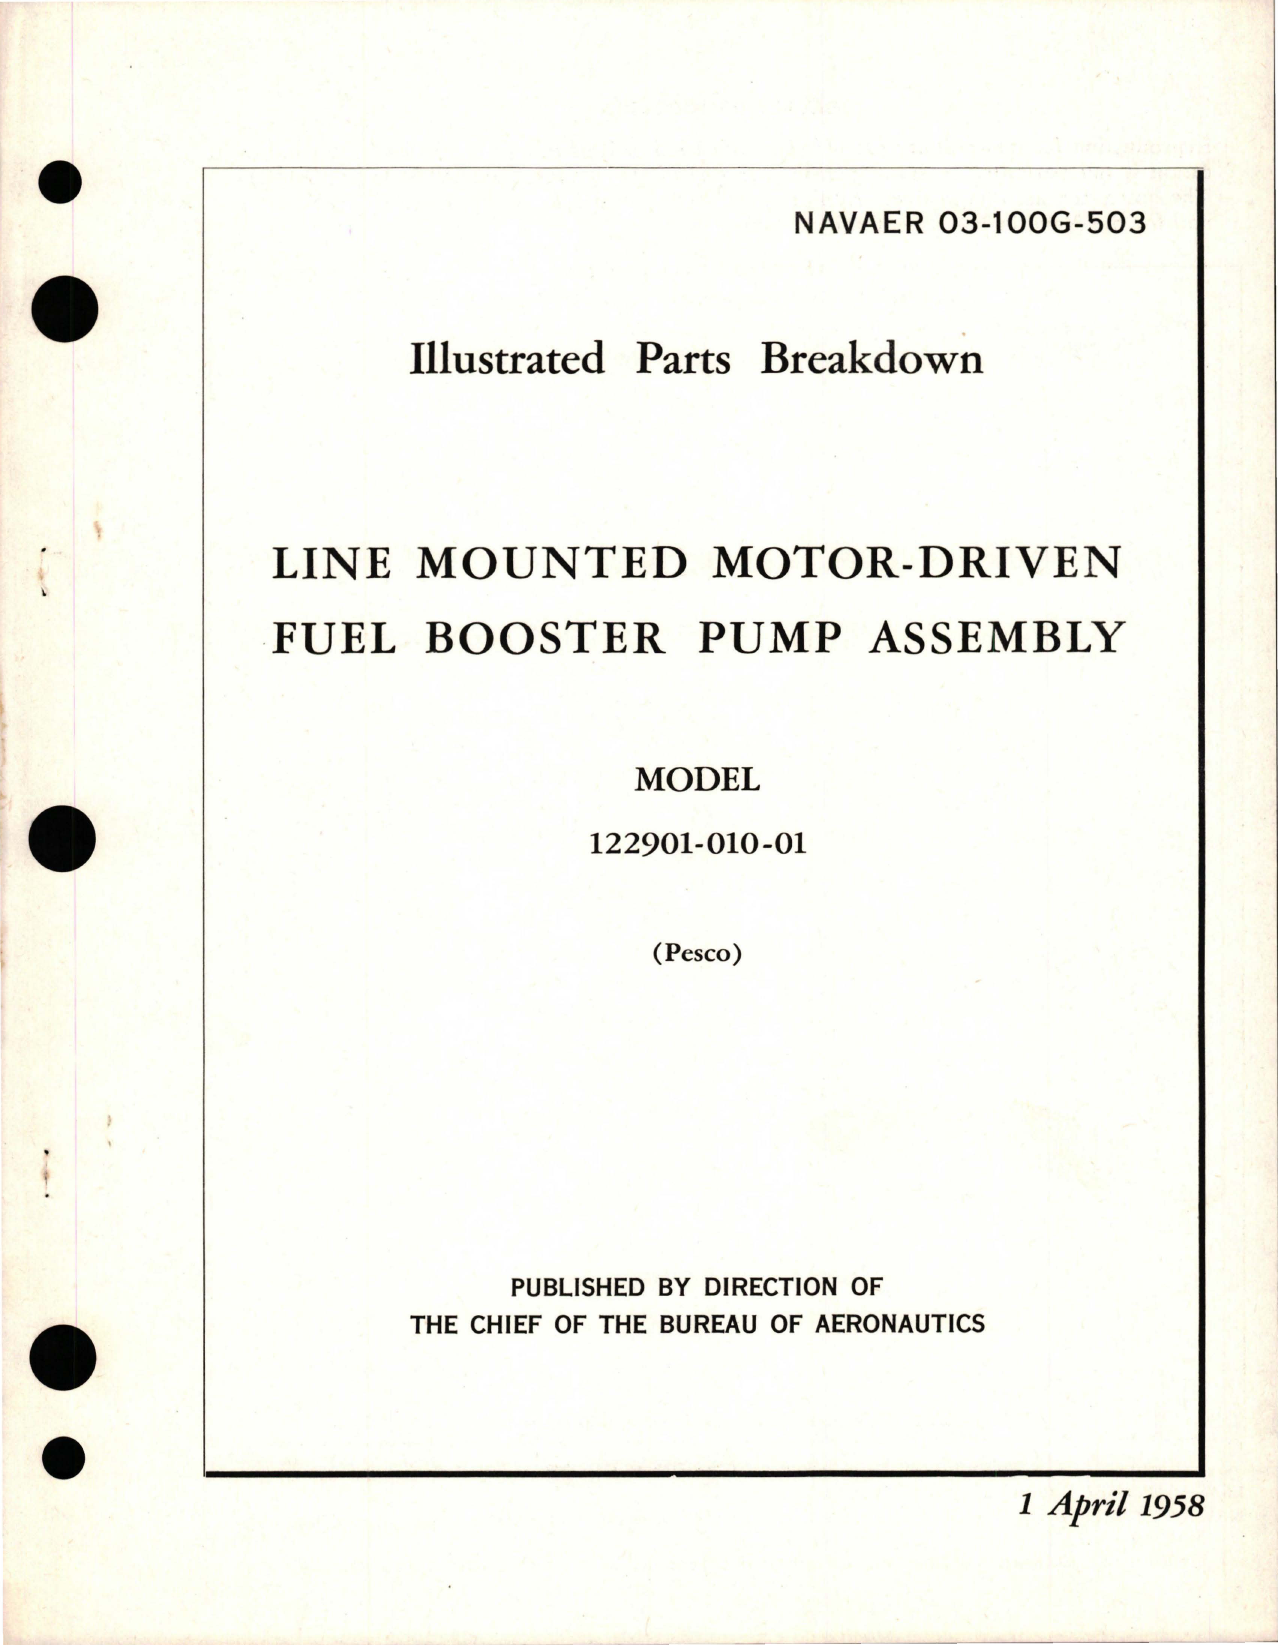 Sample page 1 from AirCorps Library document: Illustrated Parts Breakdown for Line Mounted Motor-Driven Fuel Booster Pump Assembly - Model 122901-010-01